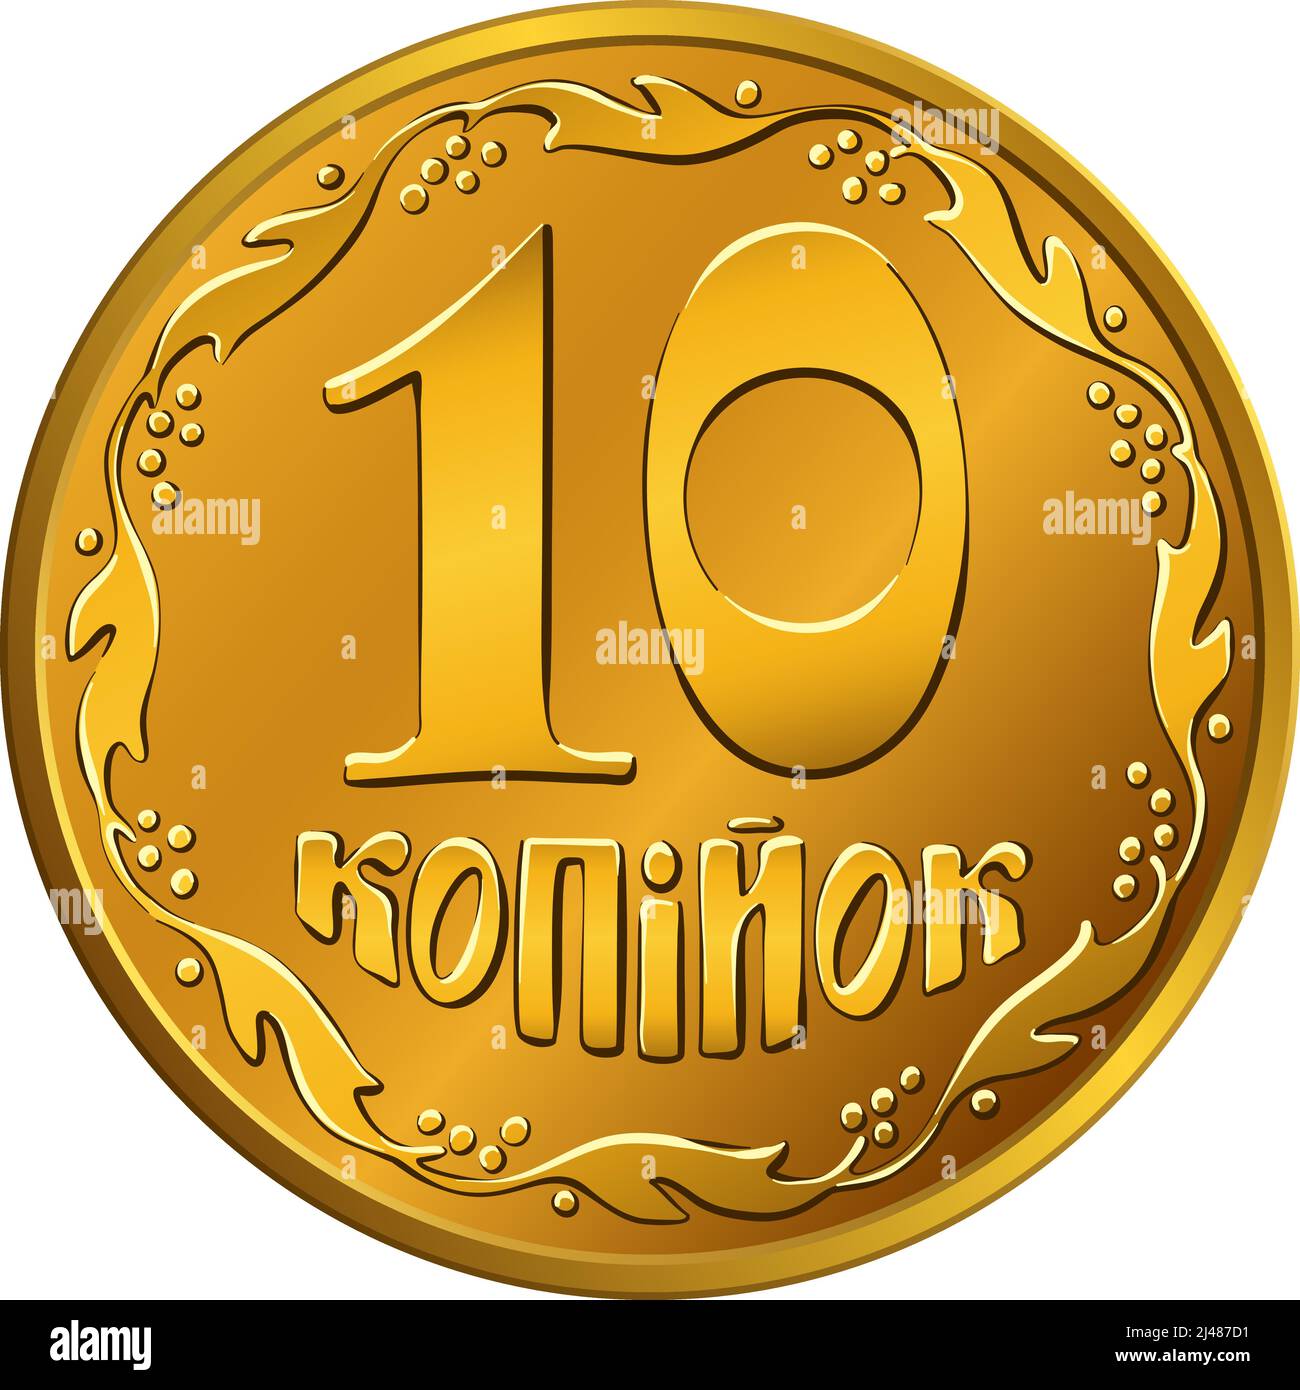 Ukrainian money gold coin 10 kopiyok, obverse with value and ornament of stylized branches Stock Vector